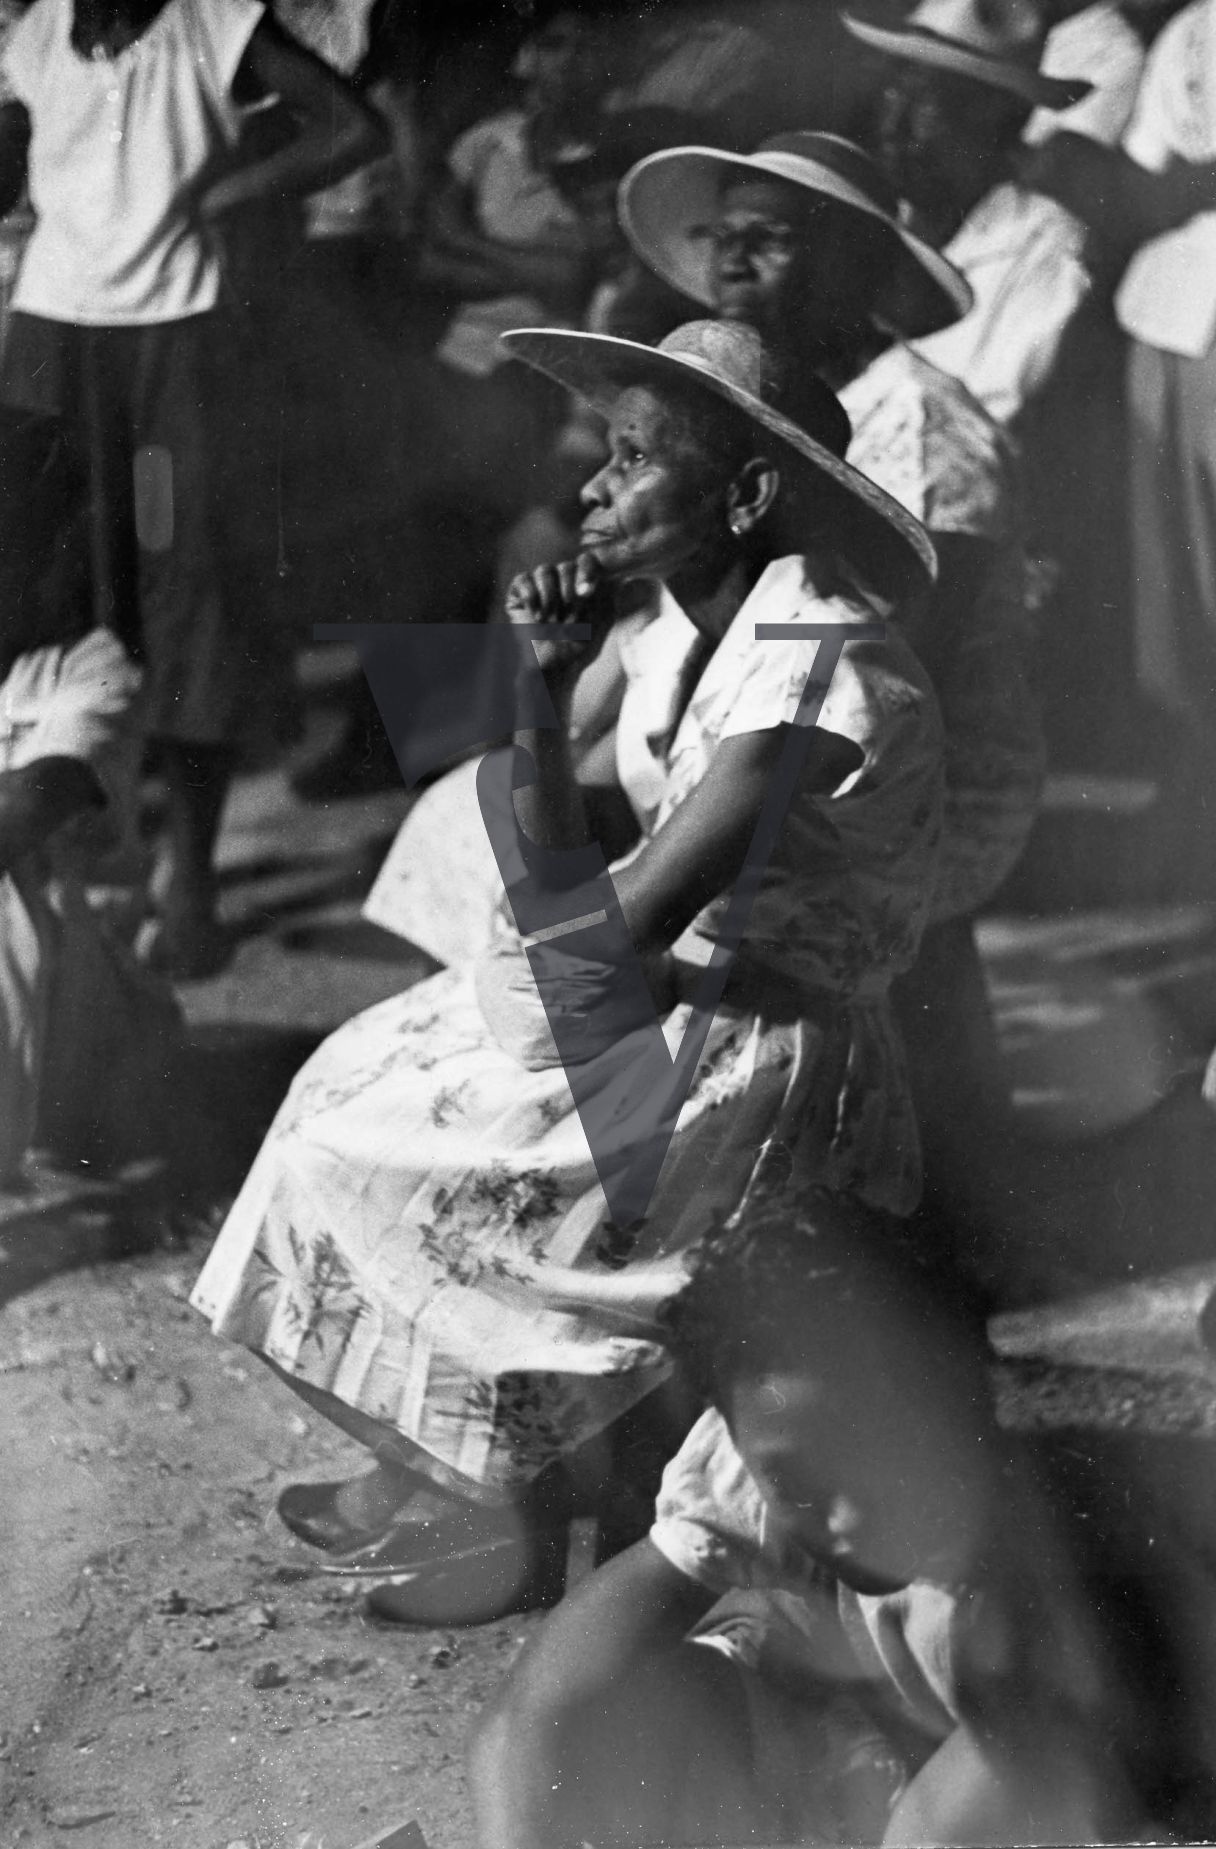 Belize, George Cadle Price, election meeting, crowd, woman looks on.